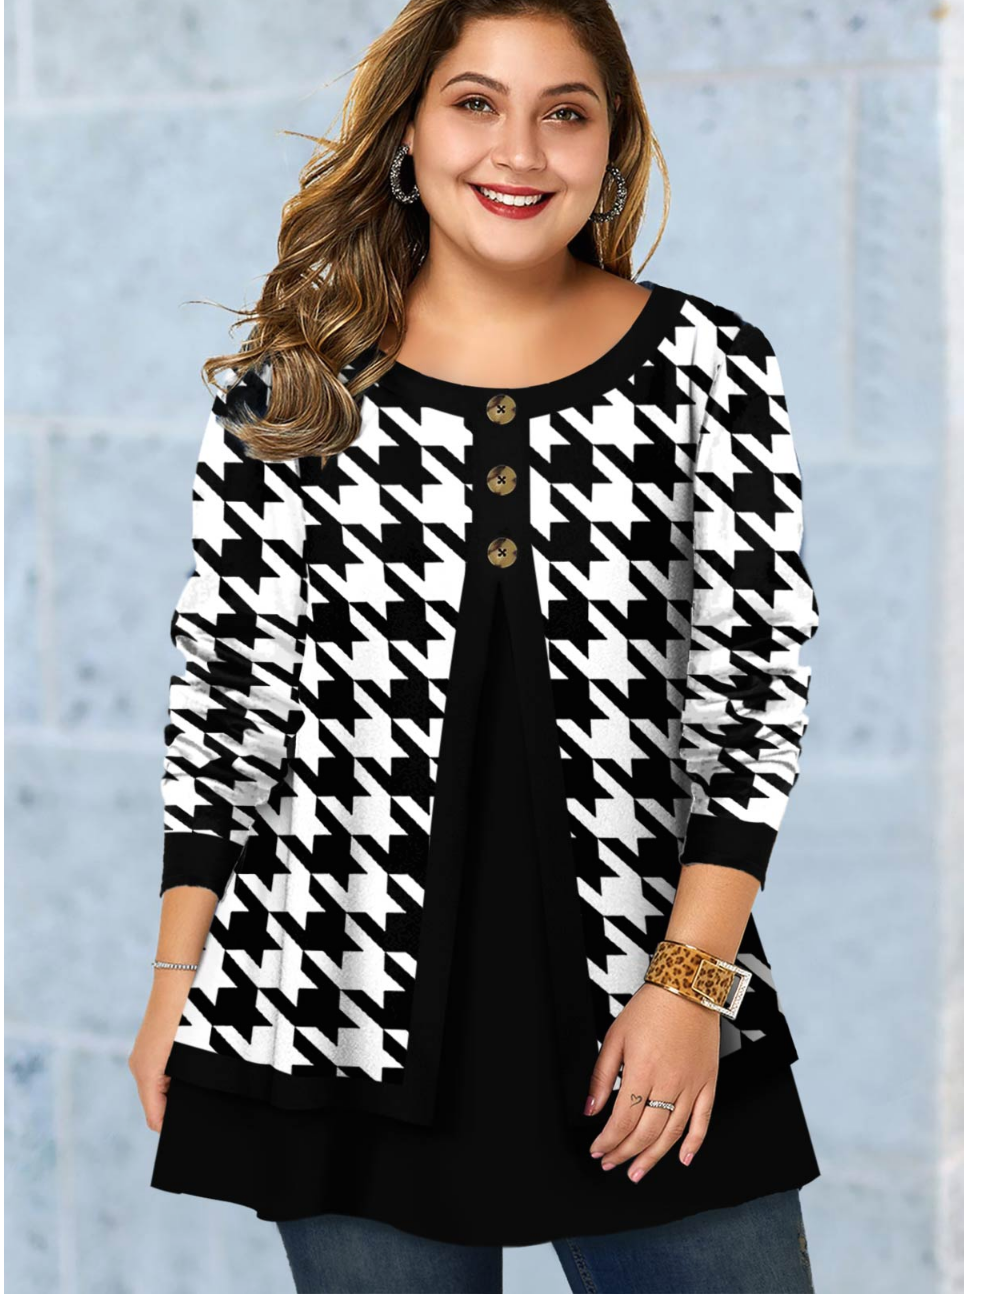 ROTITA Plus Size Button Houndstooth Print T-Shirt Review